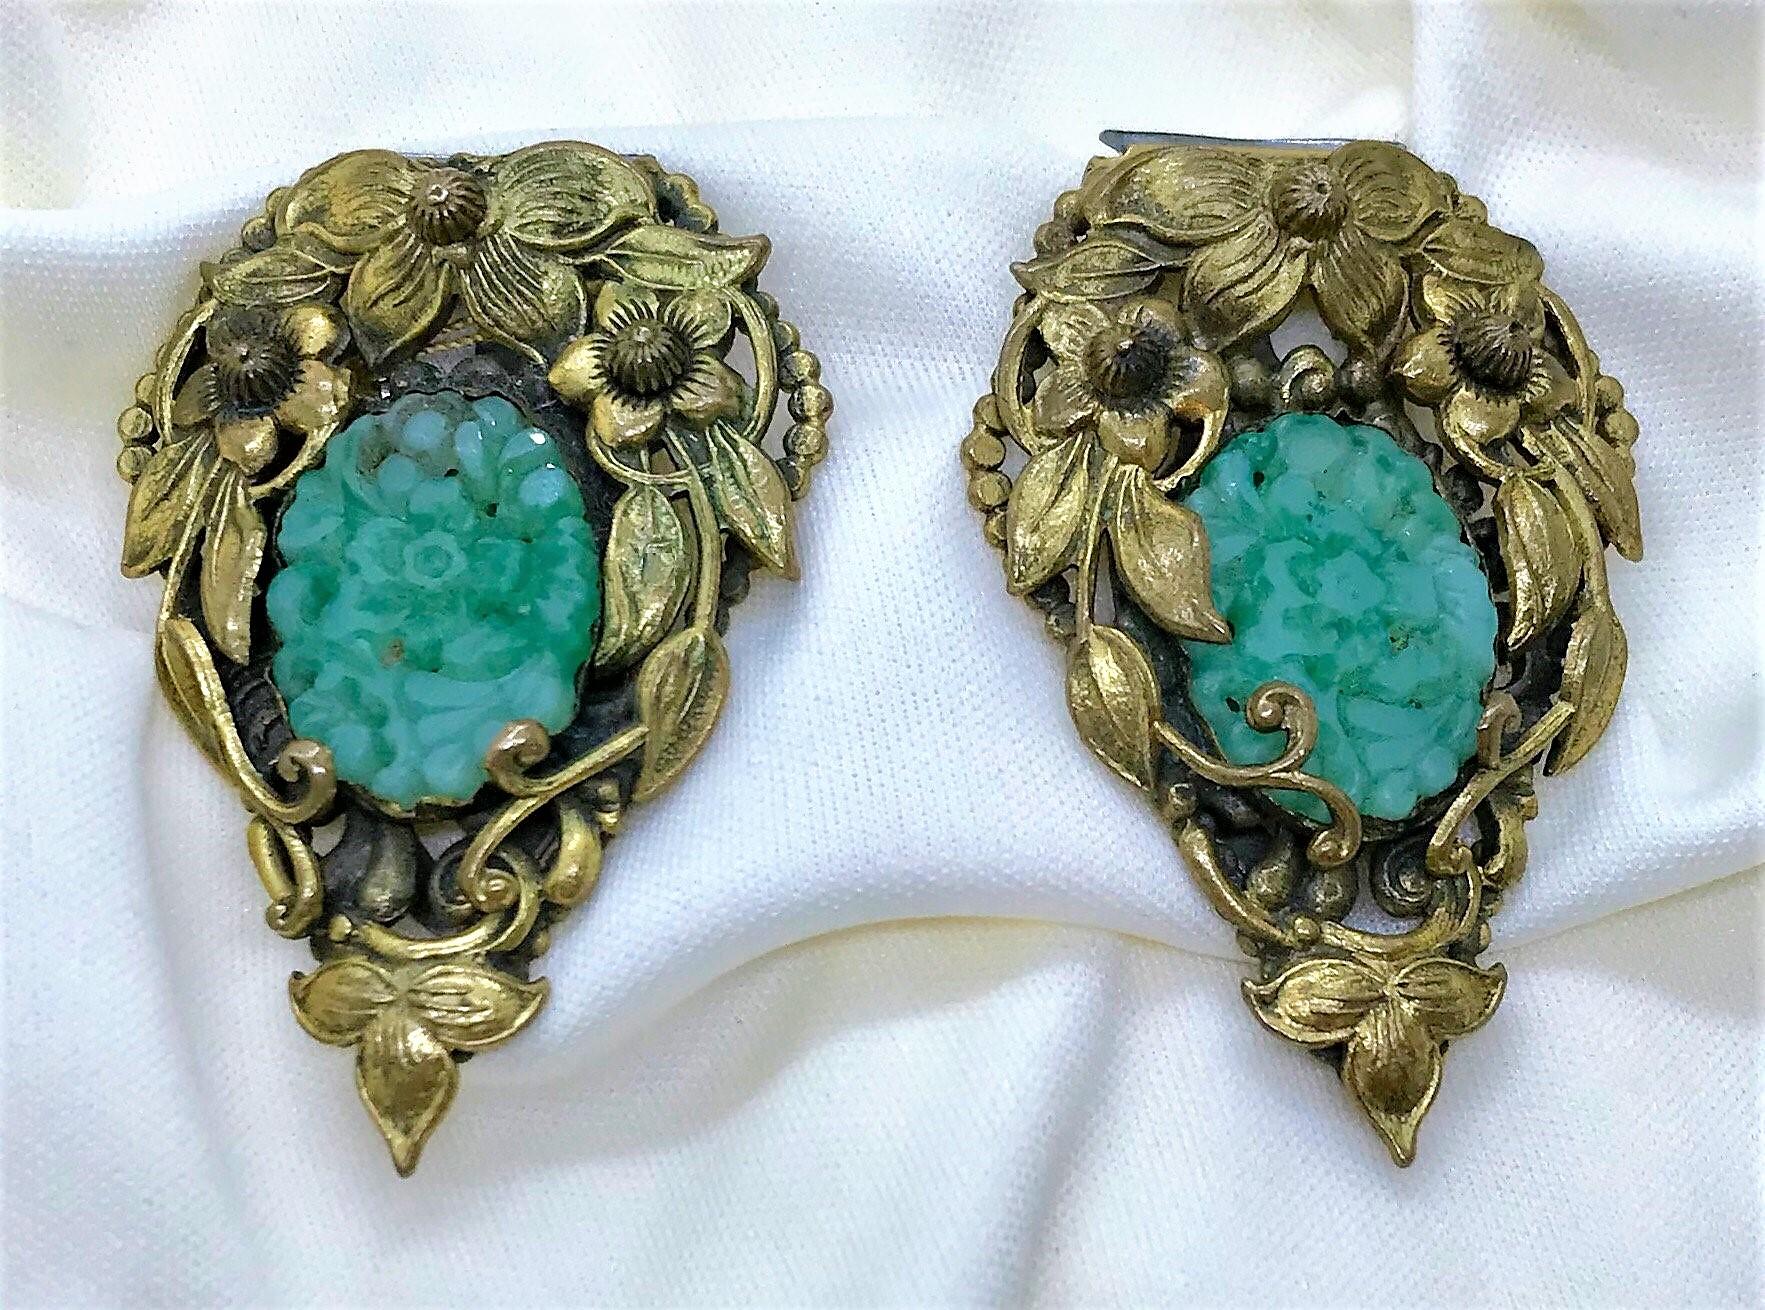 Circa 1930 Goldtone Floral Dress Clips Set With Molded Jade Green Glass, Pair For Sale 1